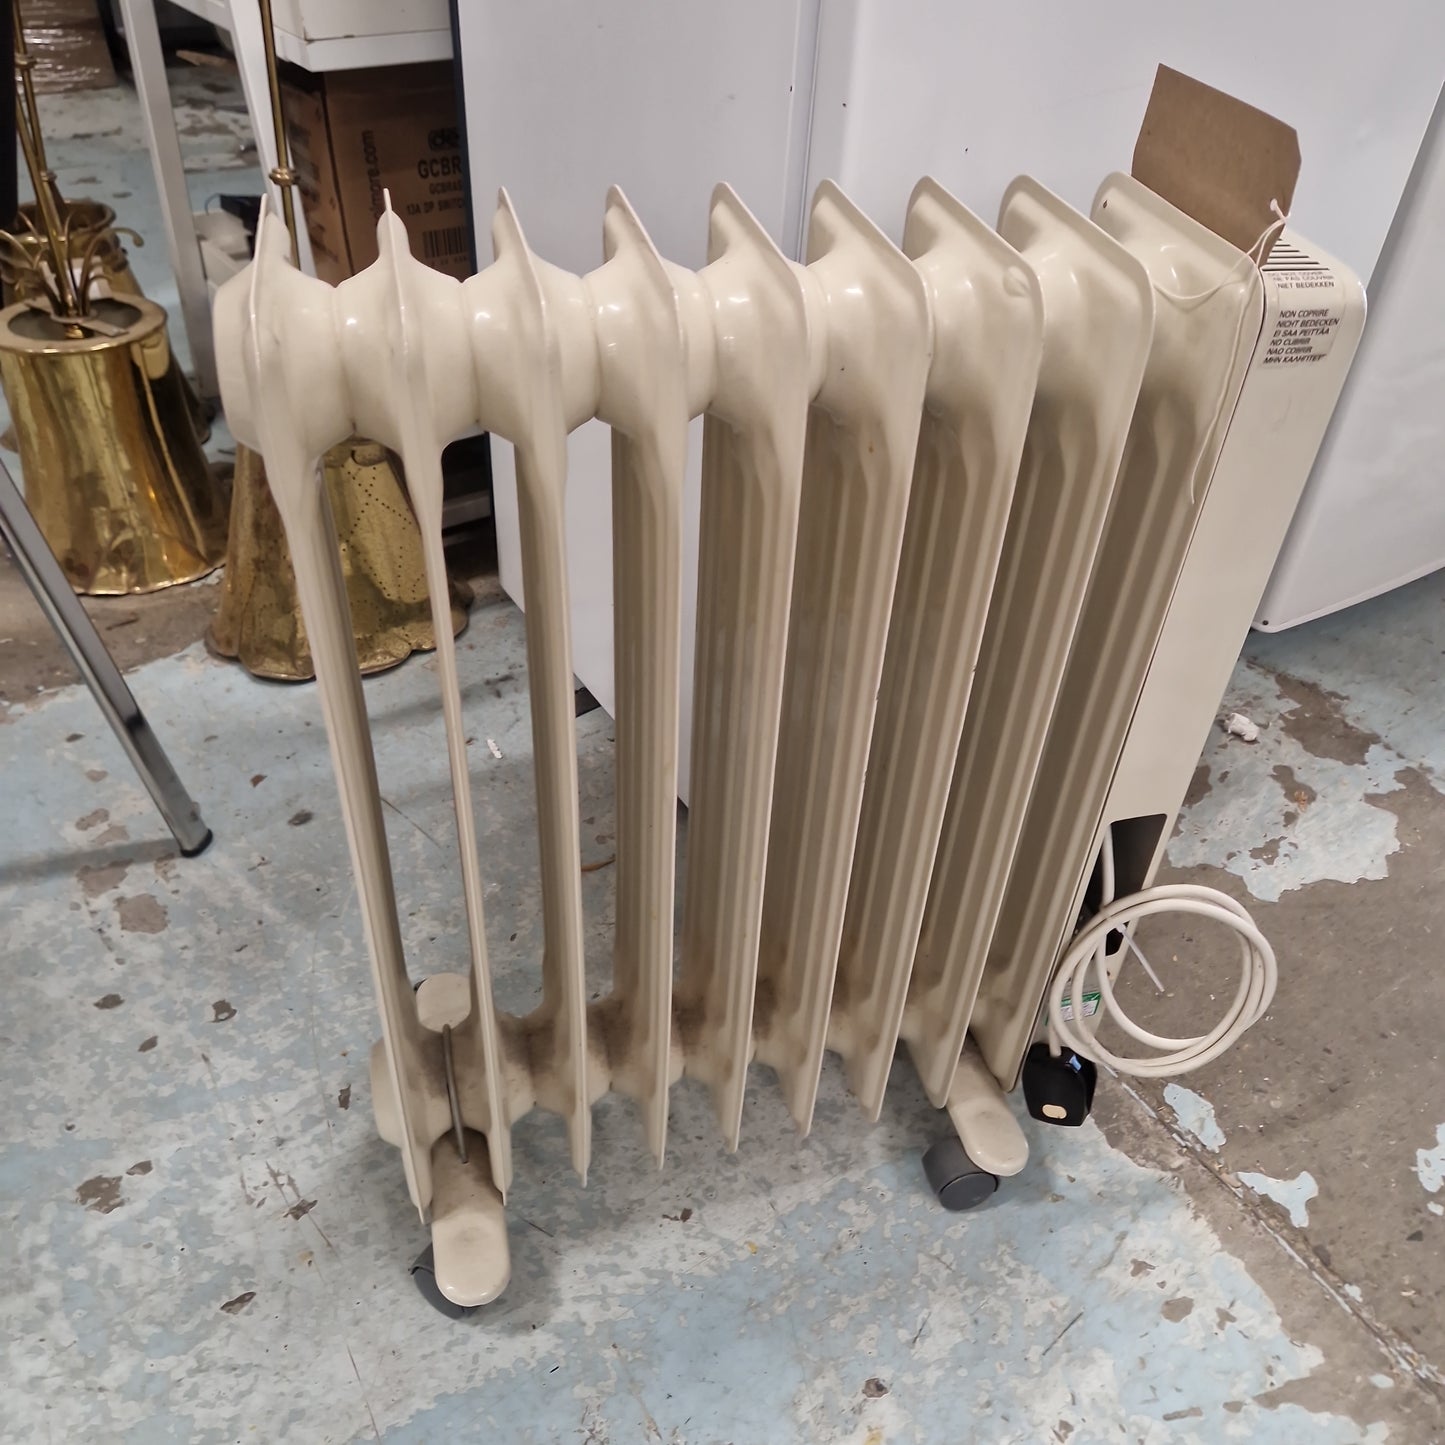 Oil filled electric radiator